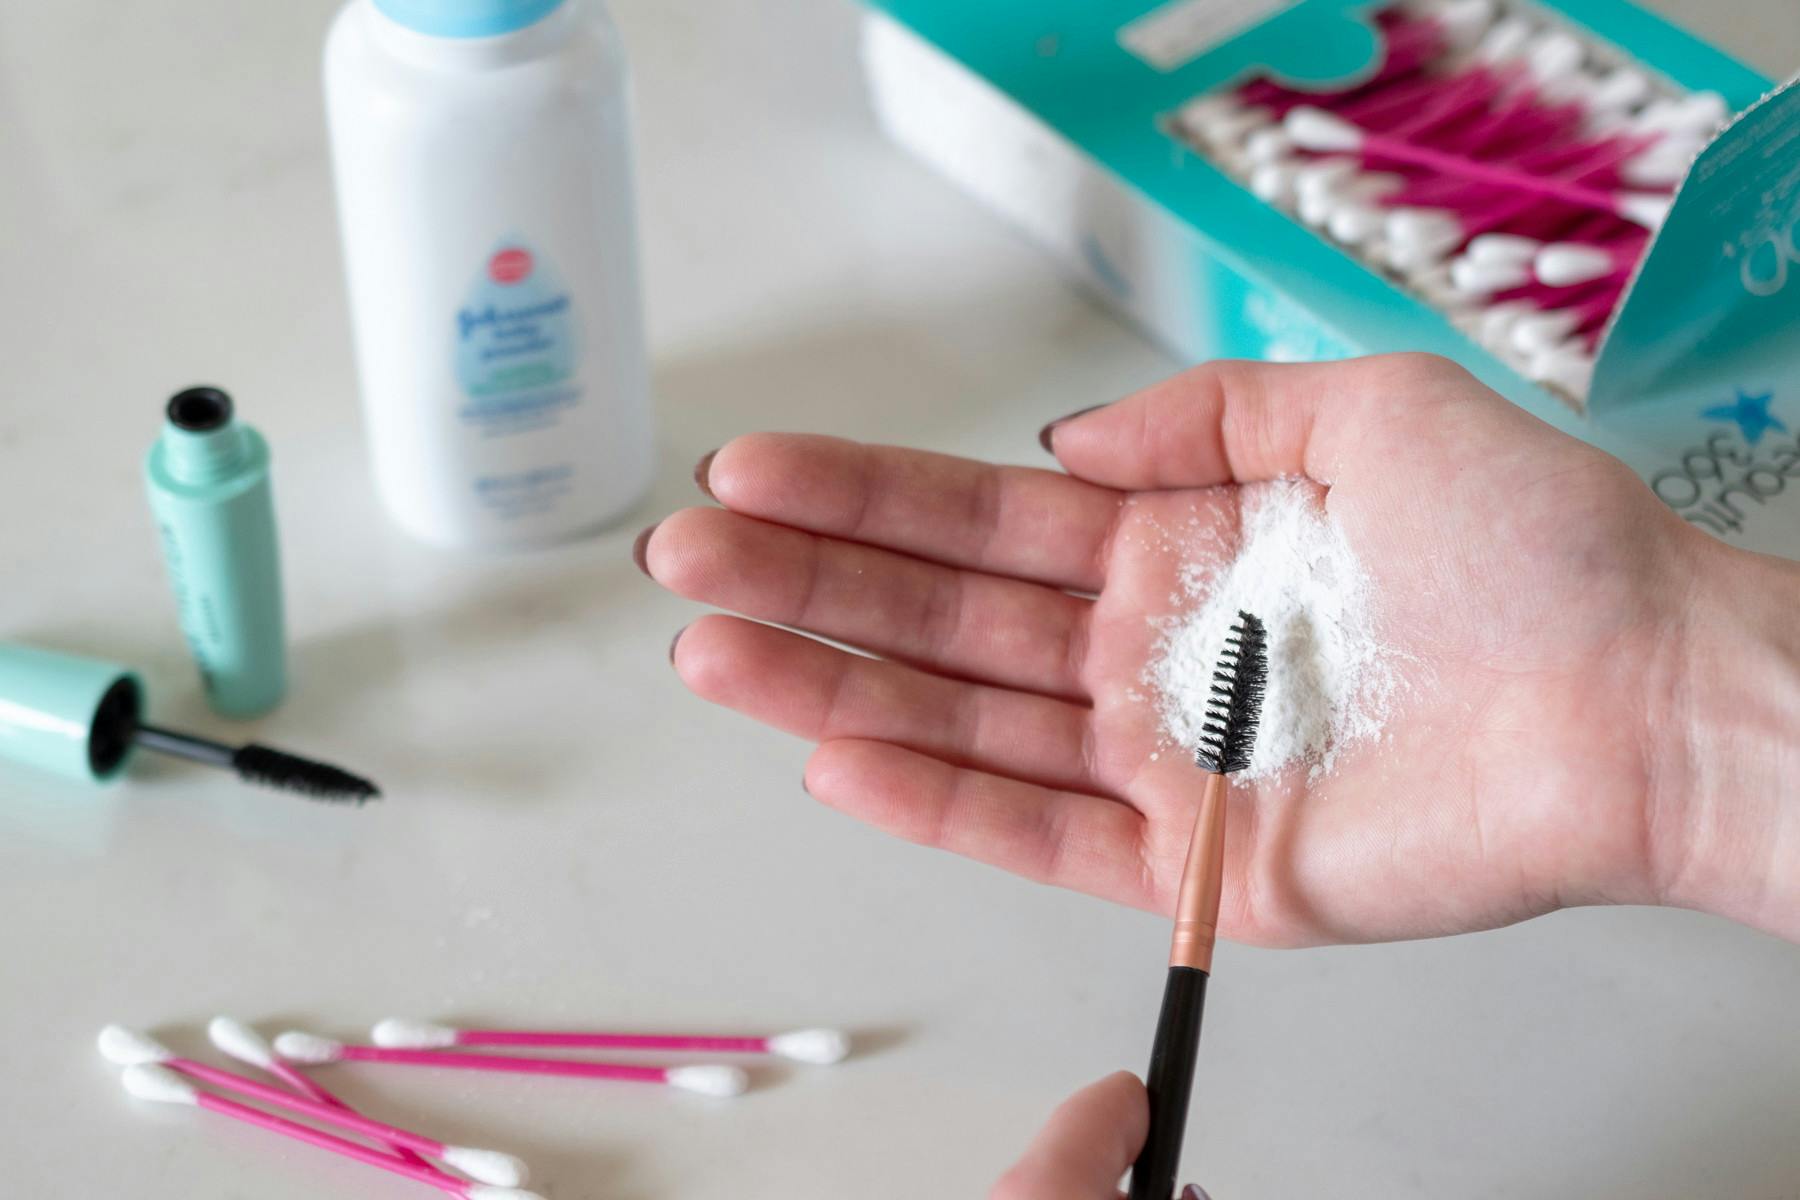 Use baby powder or translucent powder in between mascara layers for fuller lashes.